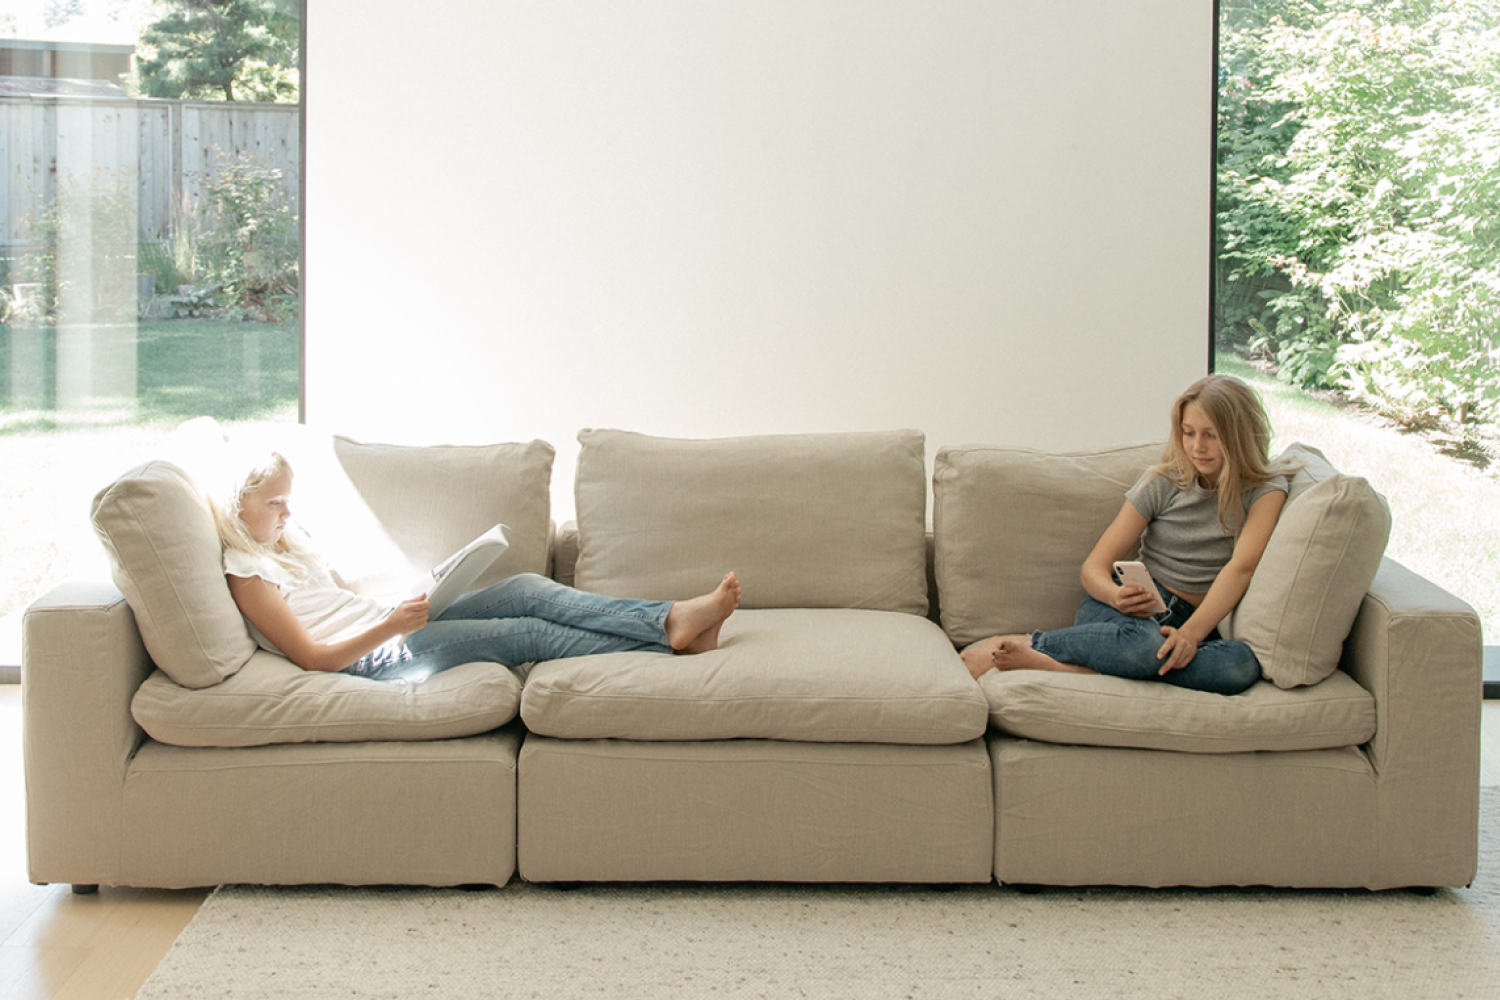 Two girls are comfortable lounging on an EM Sky Sofa in a well-lit living room with a clear view of a green backyard through a floor-to-ceiling window.